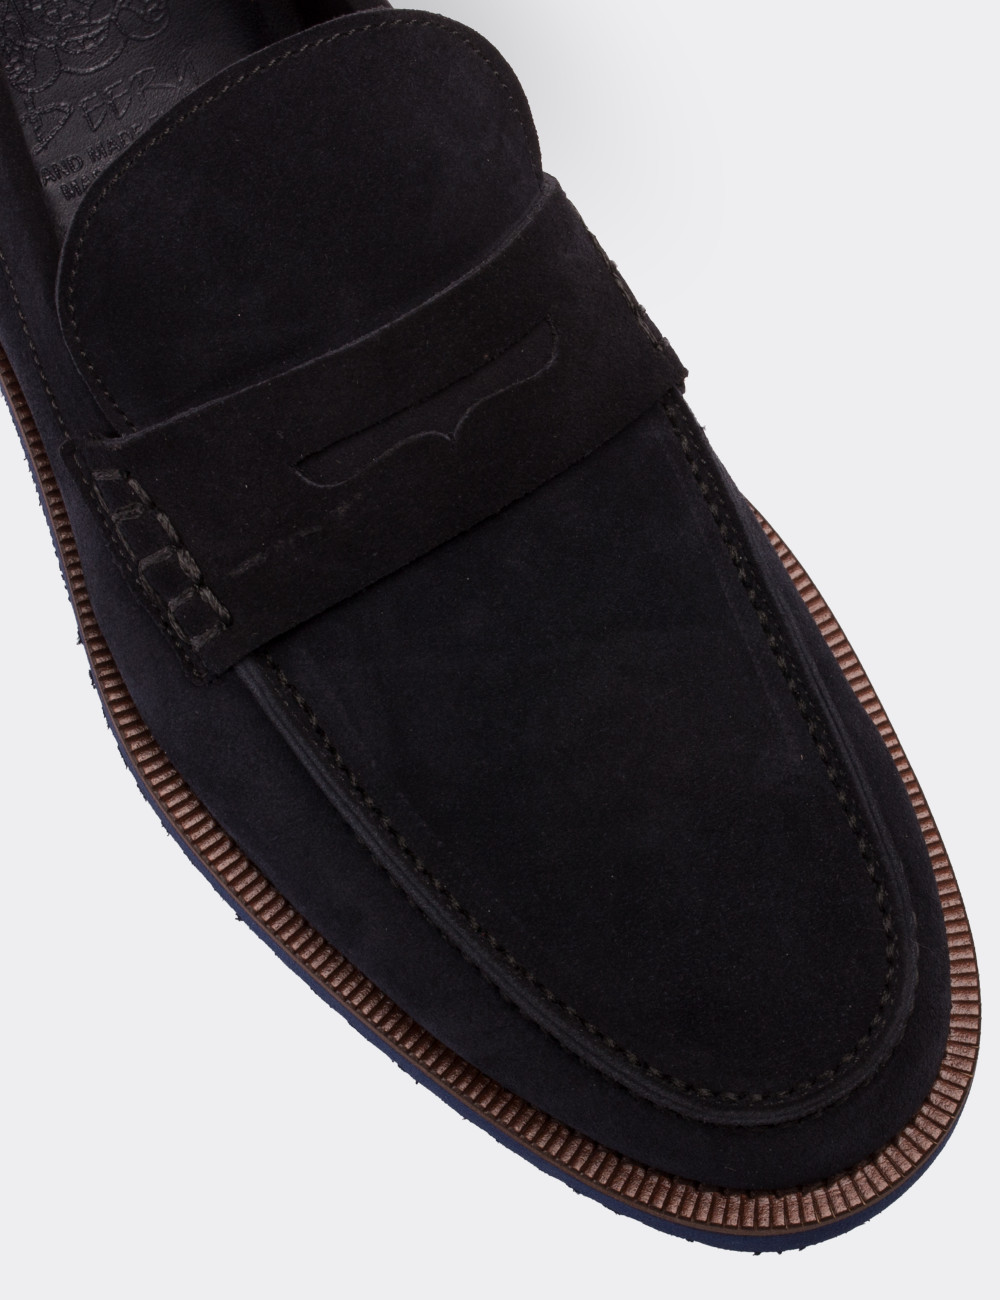 Navy Suede Leather Loafers - 01538MLCVE05